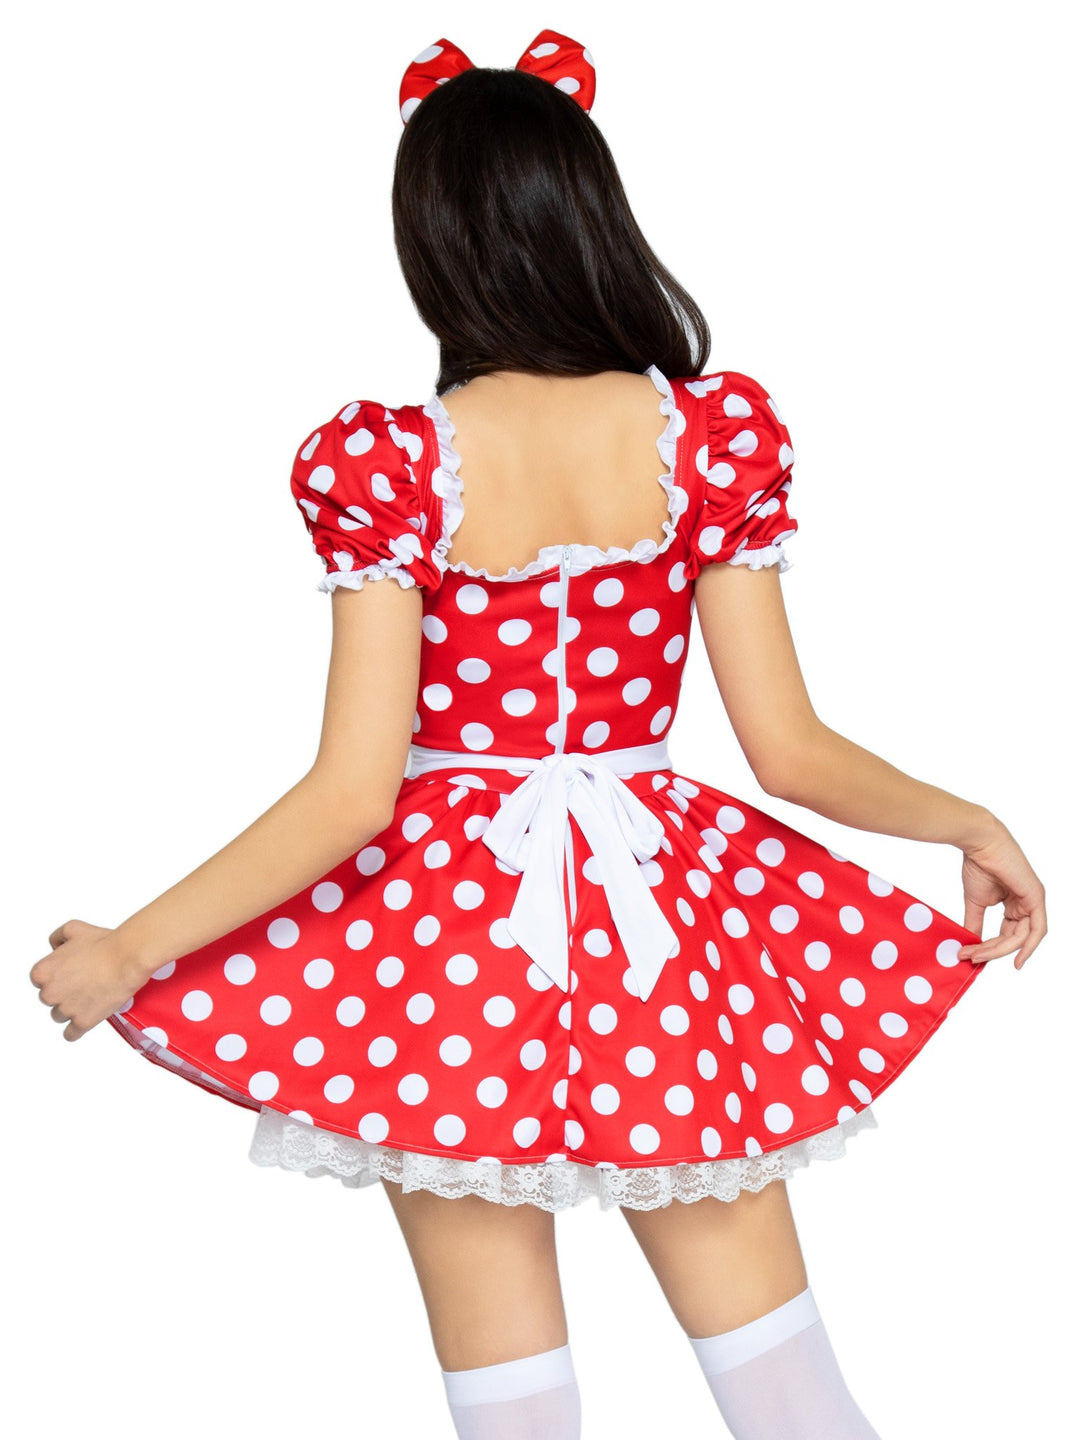 Polka Dot Dress with Ruched Sweetheart Bodice and Bow Headband